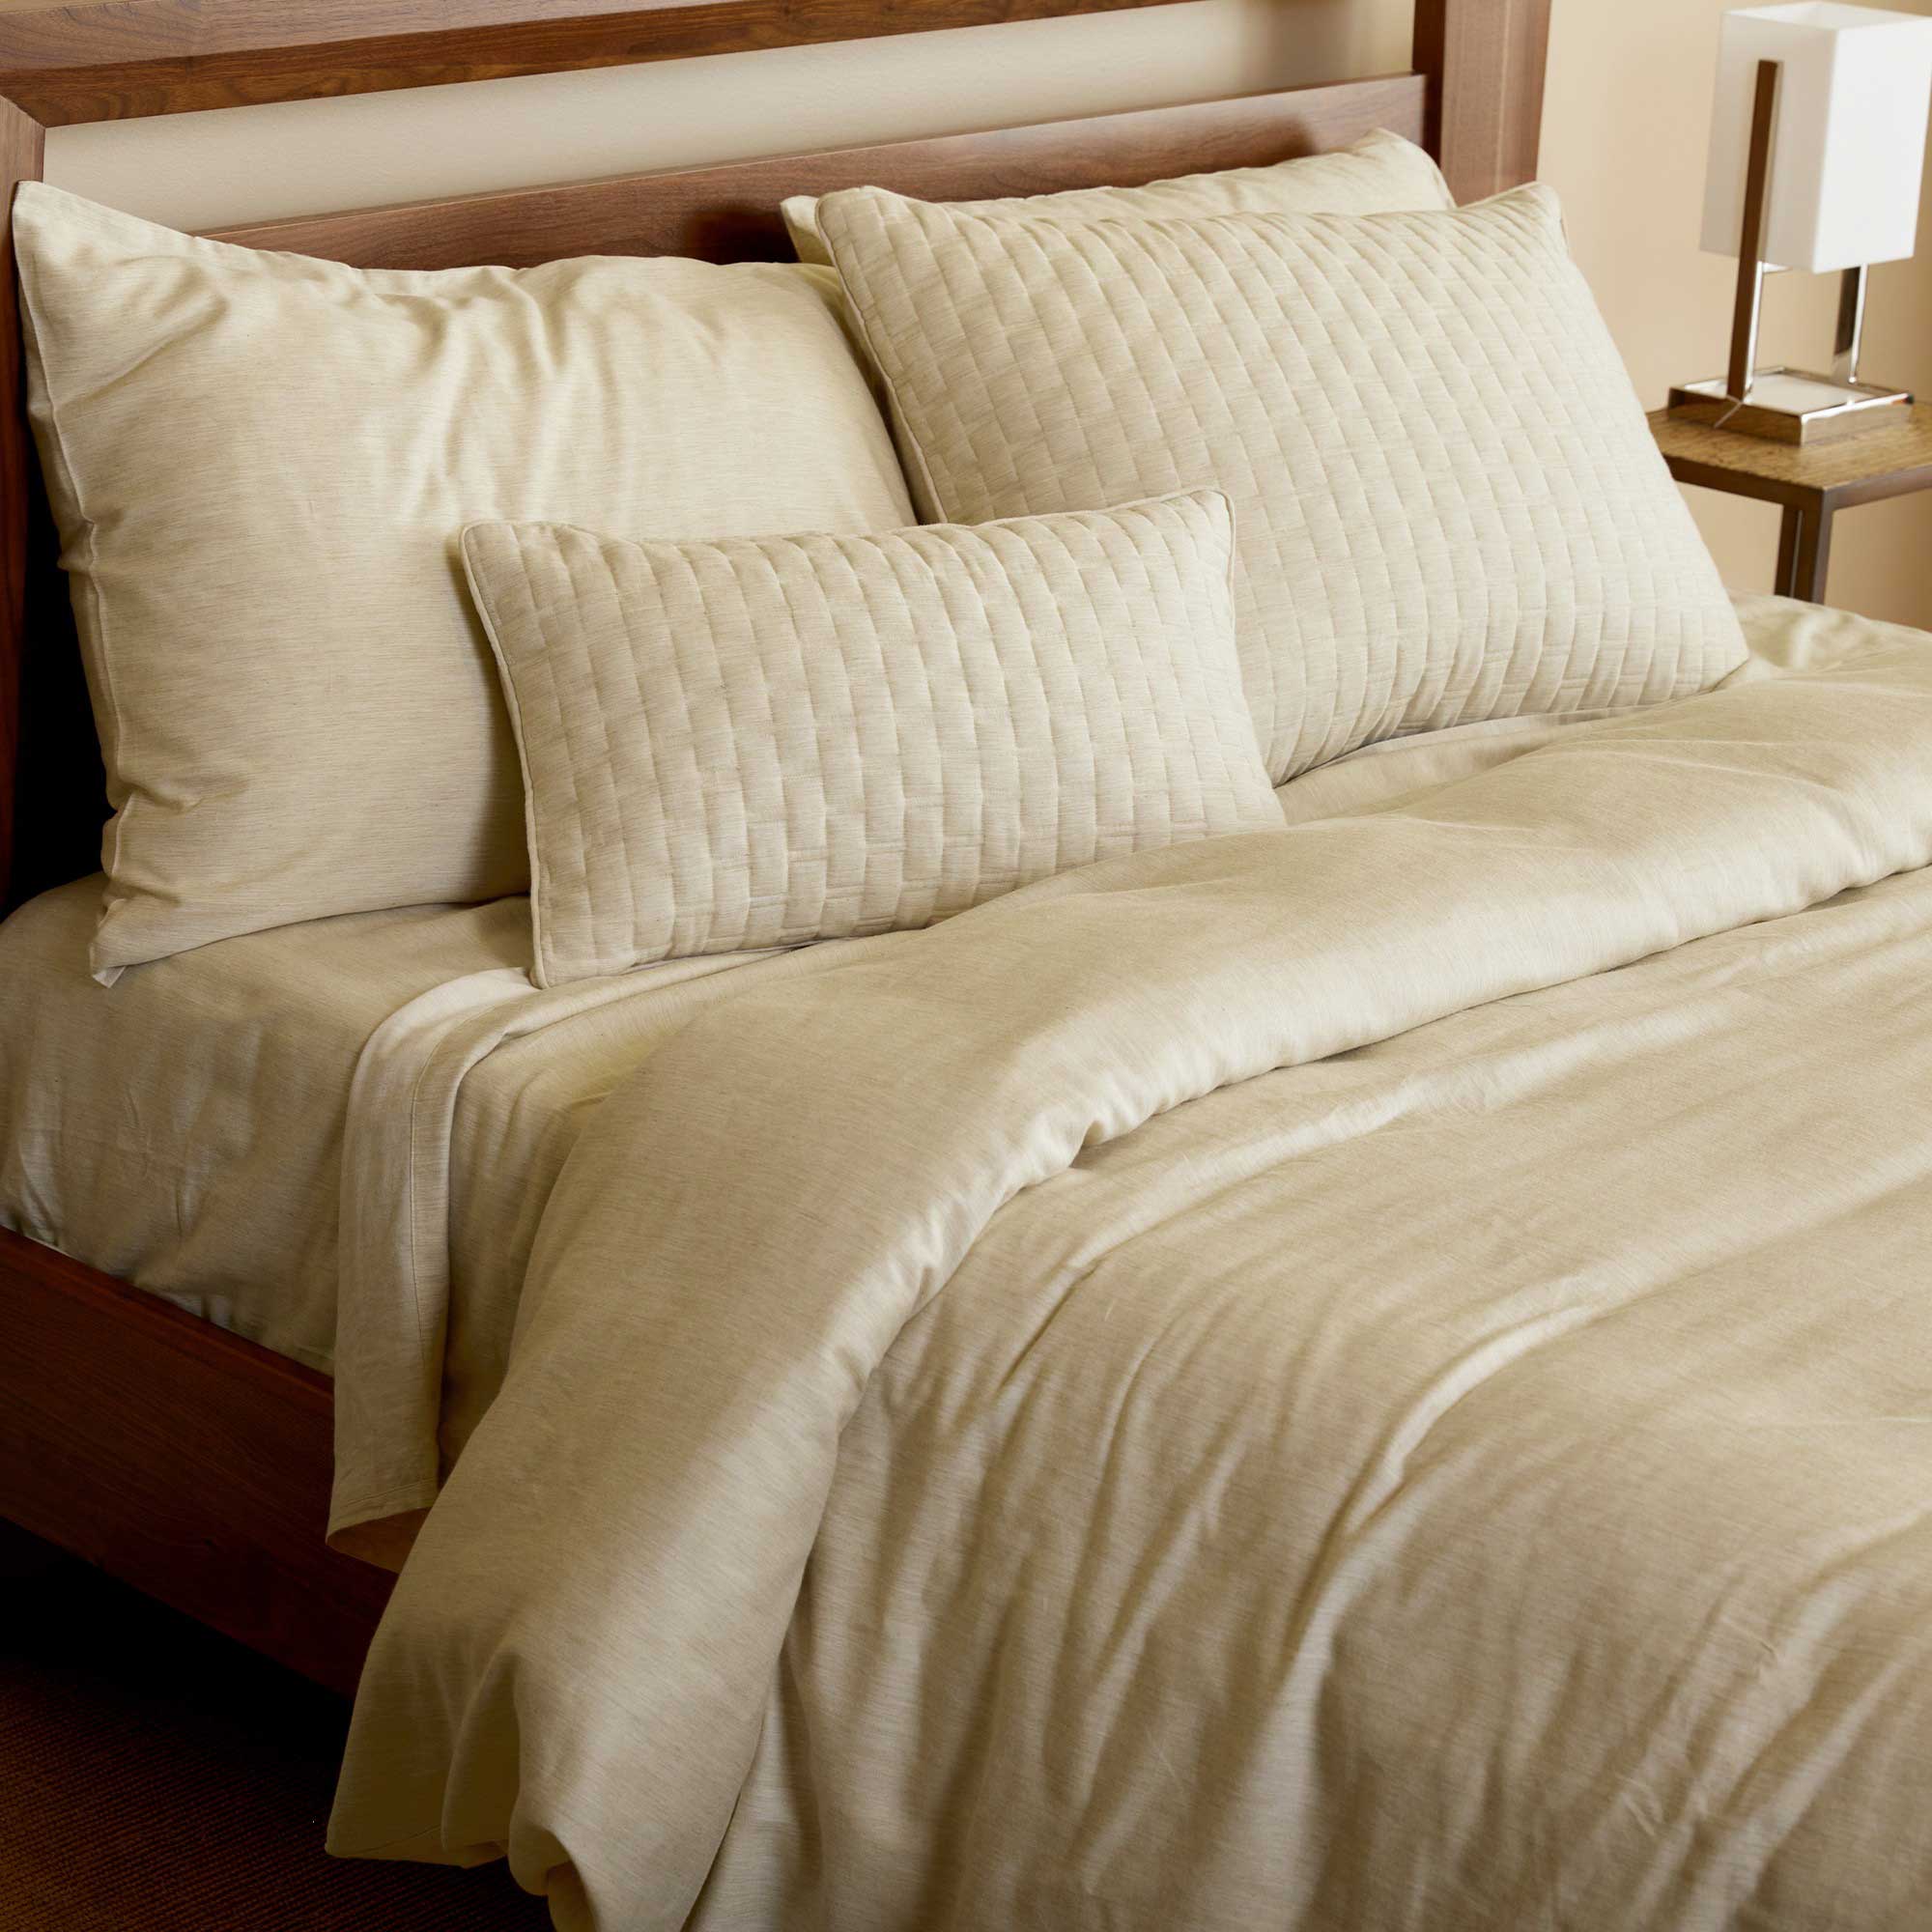 beige sand melange bamboo and duvet cover on bed looking very cozy